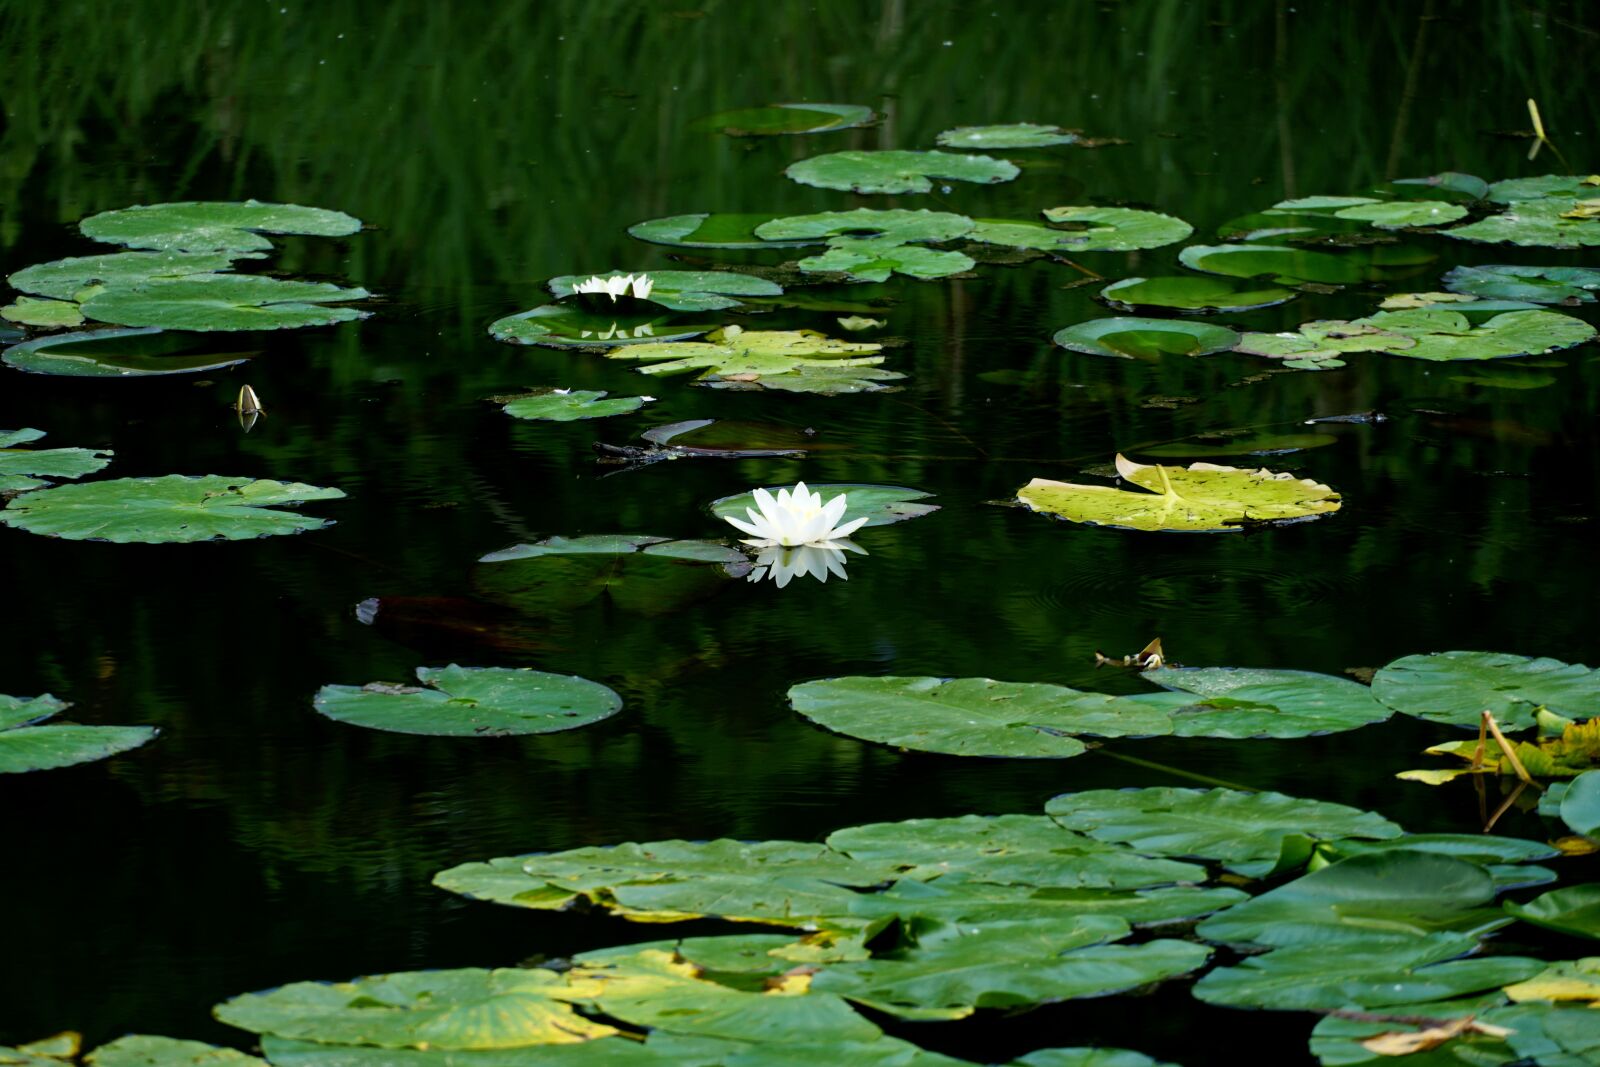 Sony a6500 sample photo. Lotus flower, pond, nature photography